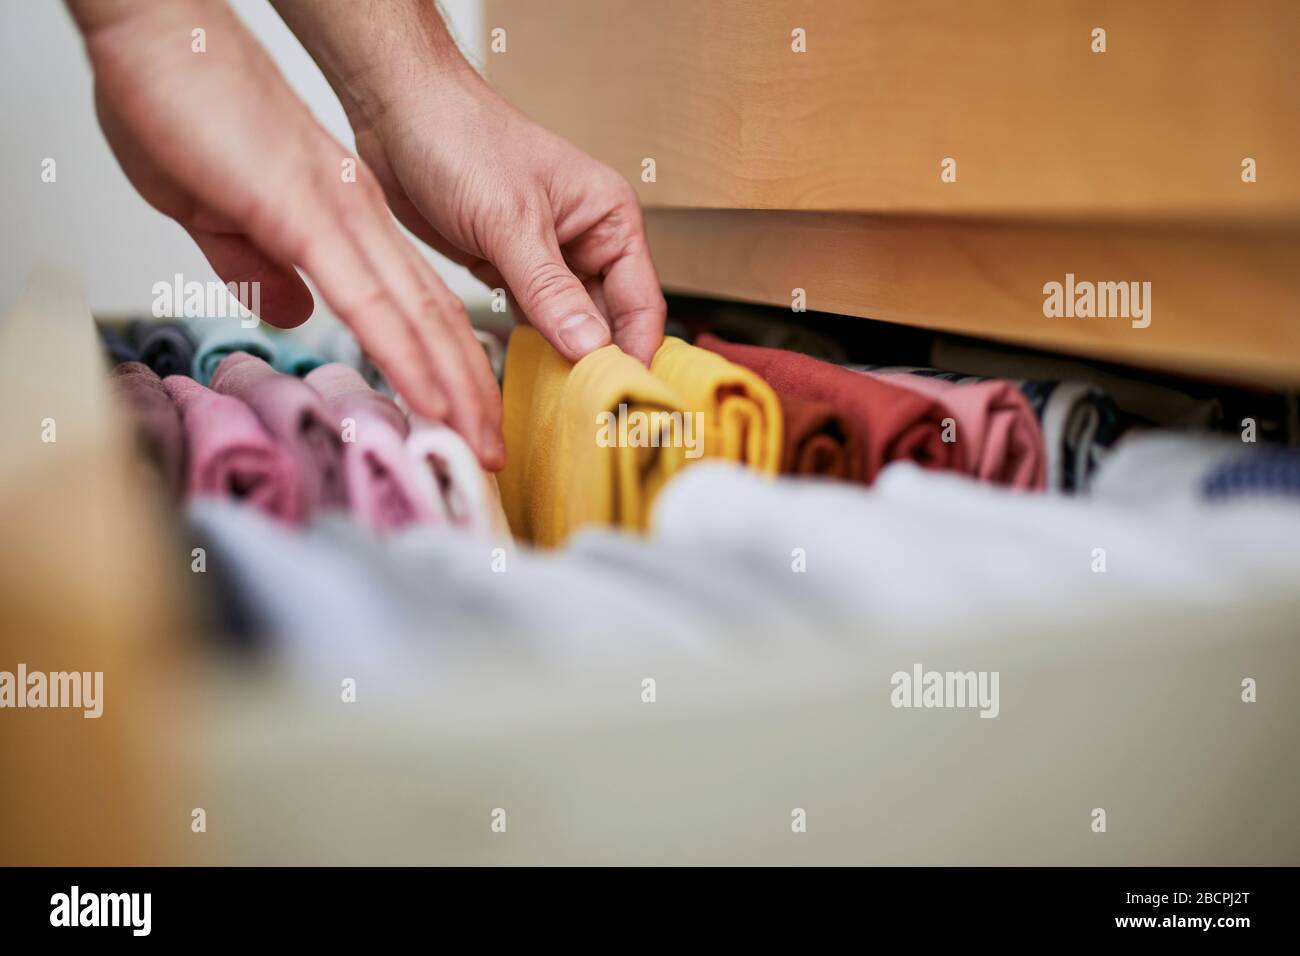 Organizing and cleaning home. Man preparing orderly folded t-shirts in drawer. Stock Photo